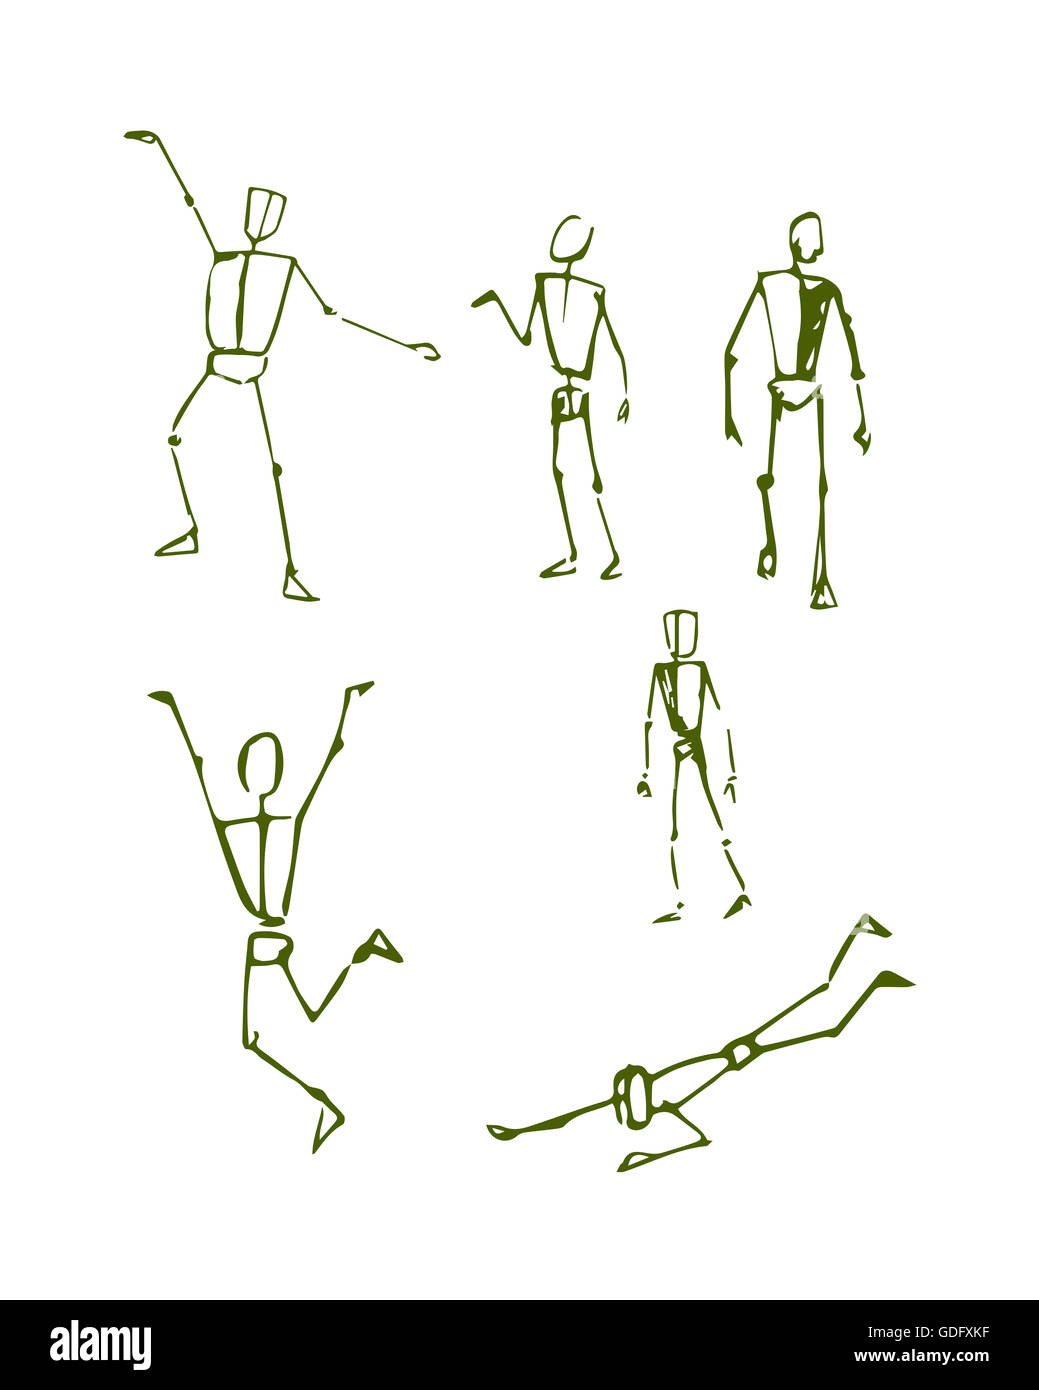 Tutorial Of Drawing A Female Body Drawing The Human Body Step By Step  Lessons Stock Photo Picture And Royalty Free Image Image 147861039